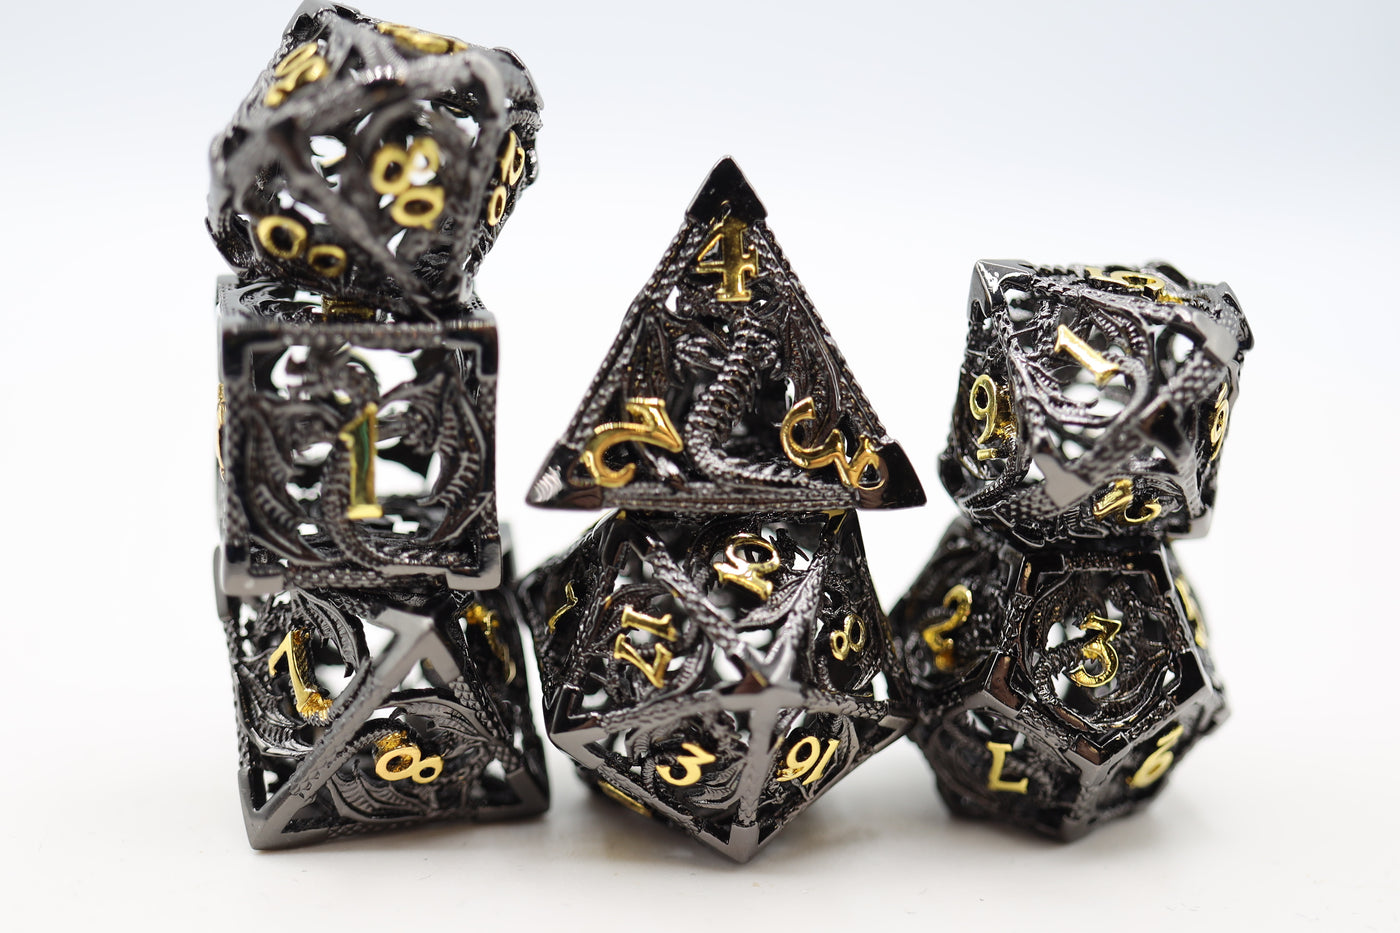 Chained Hollow Night Dragon RPG Metal Dice Set